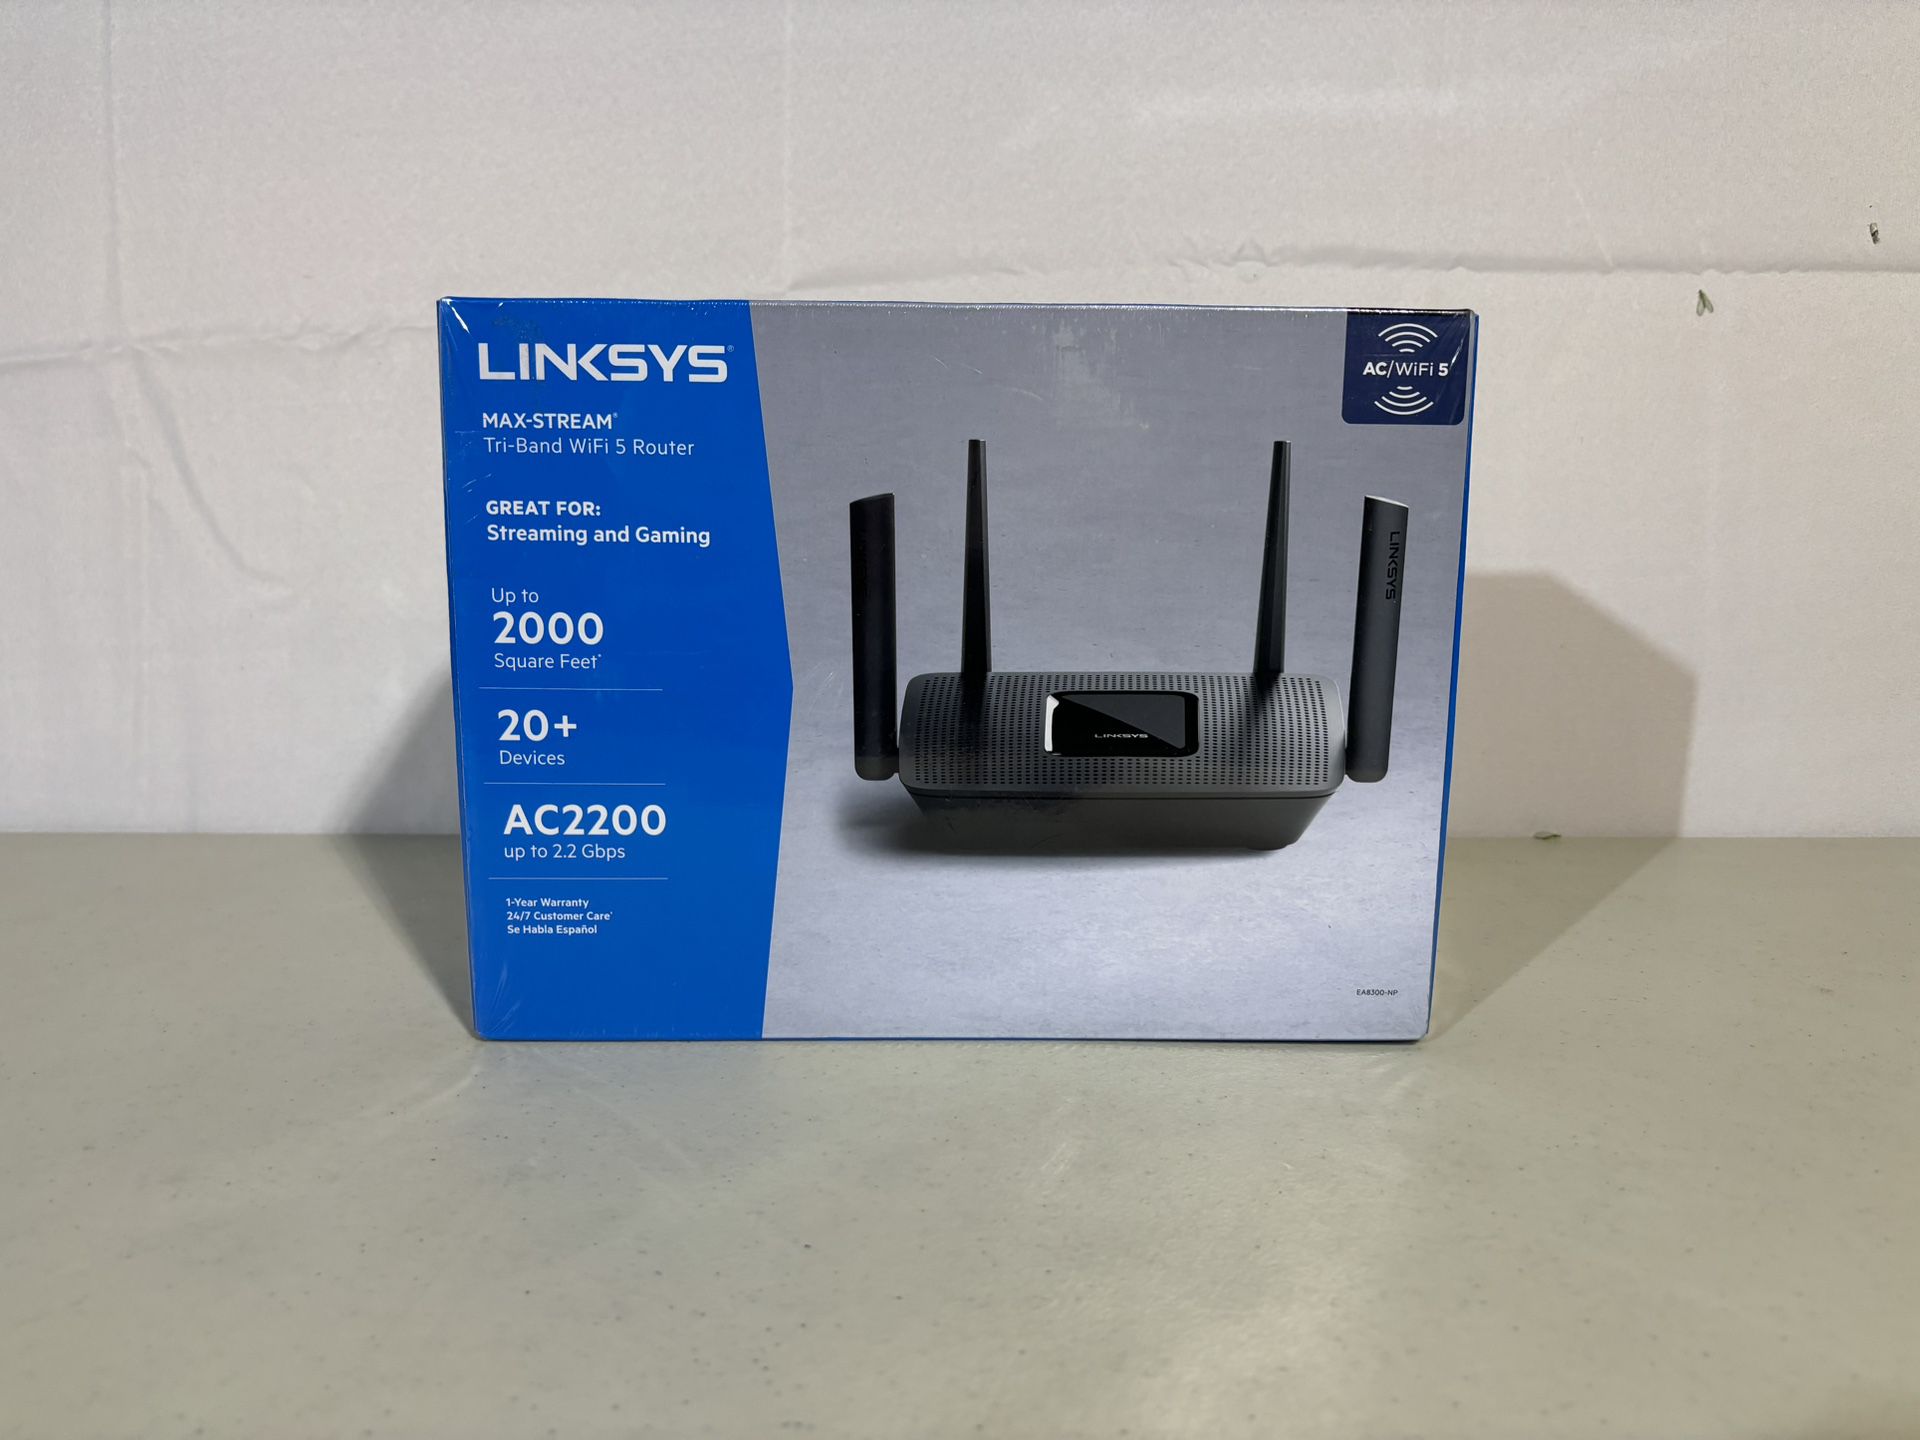 Linksys Tri-Band WiFi Router